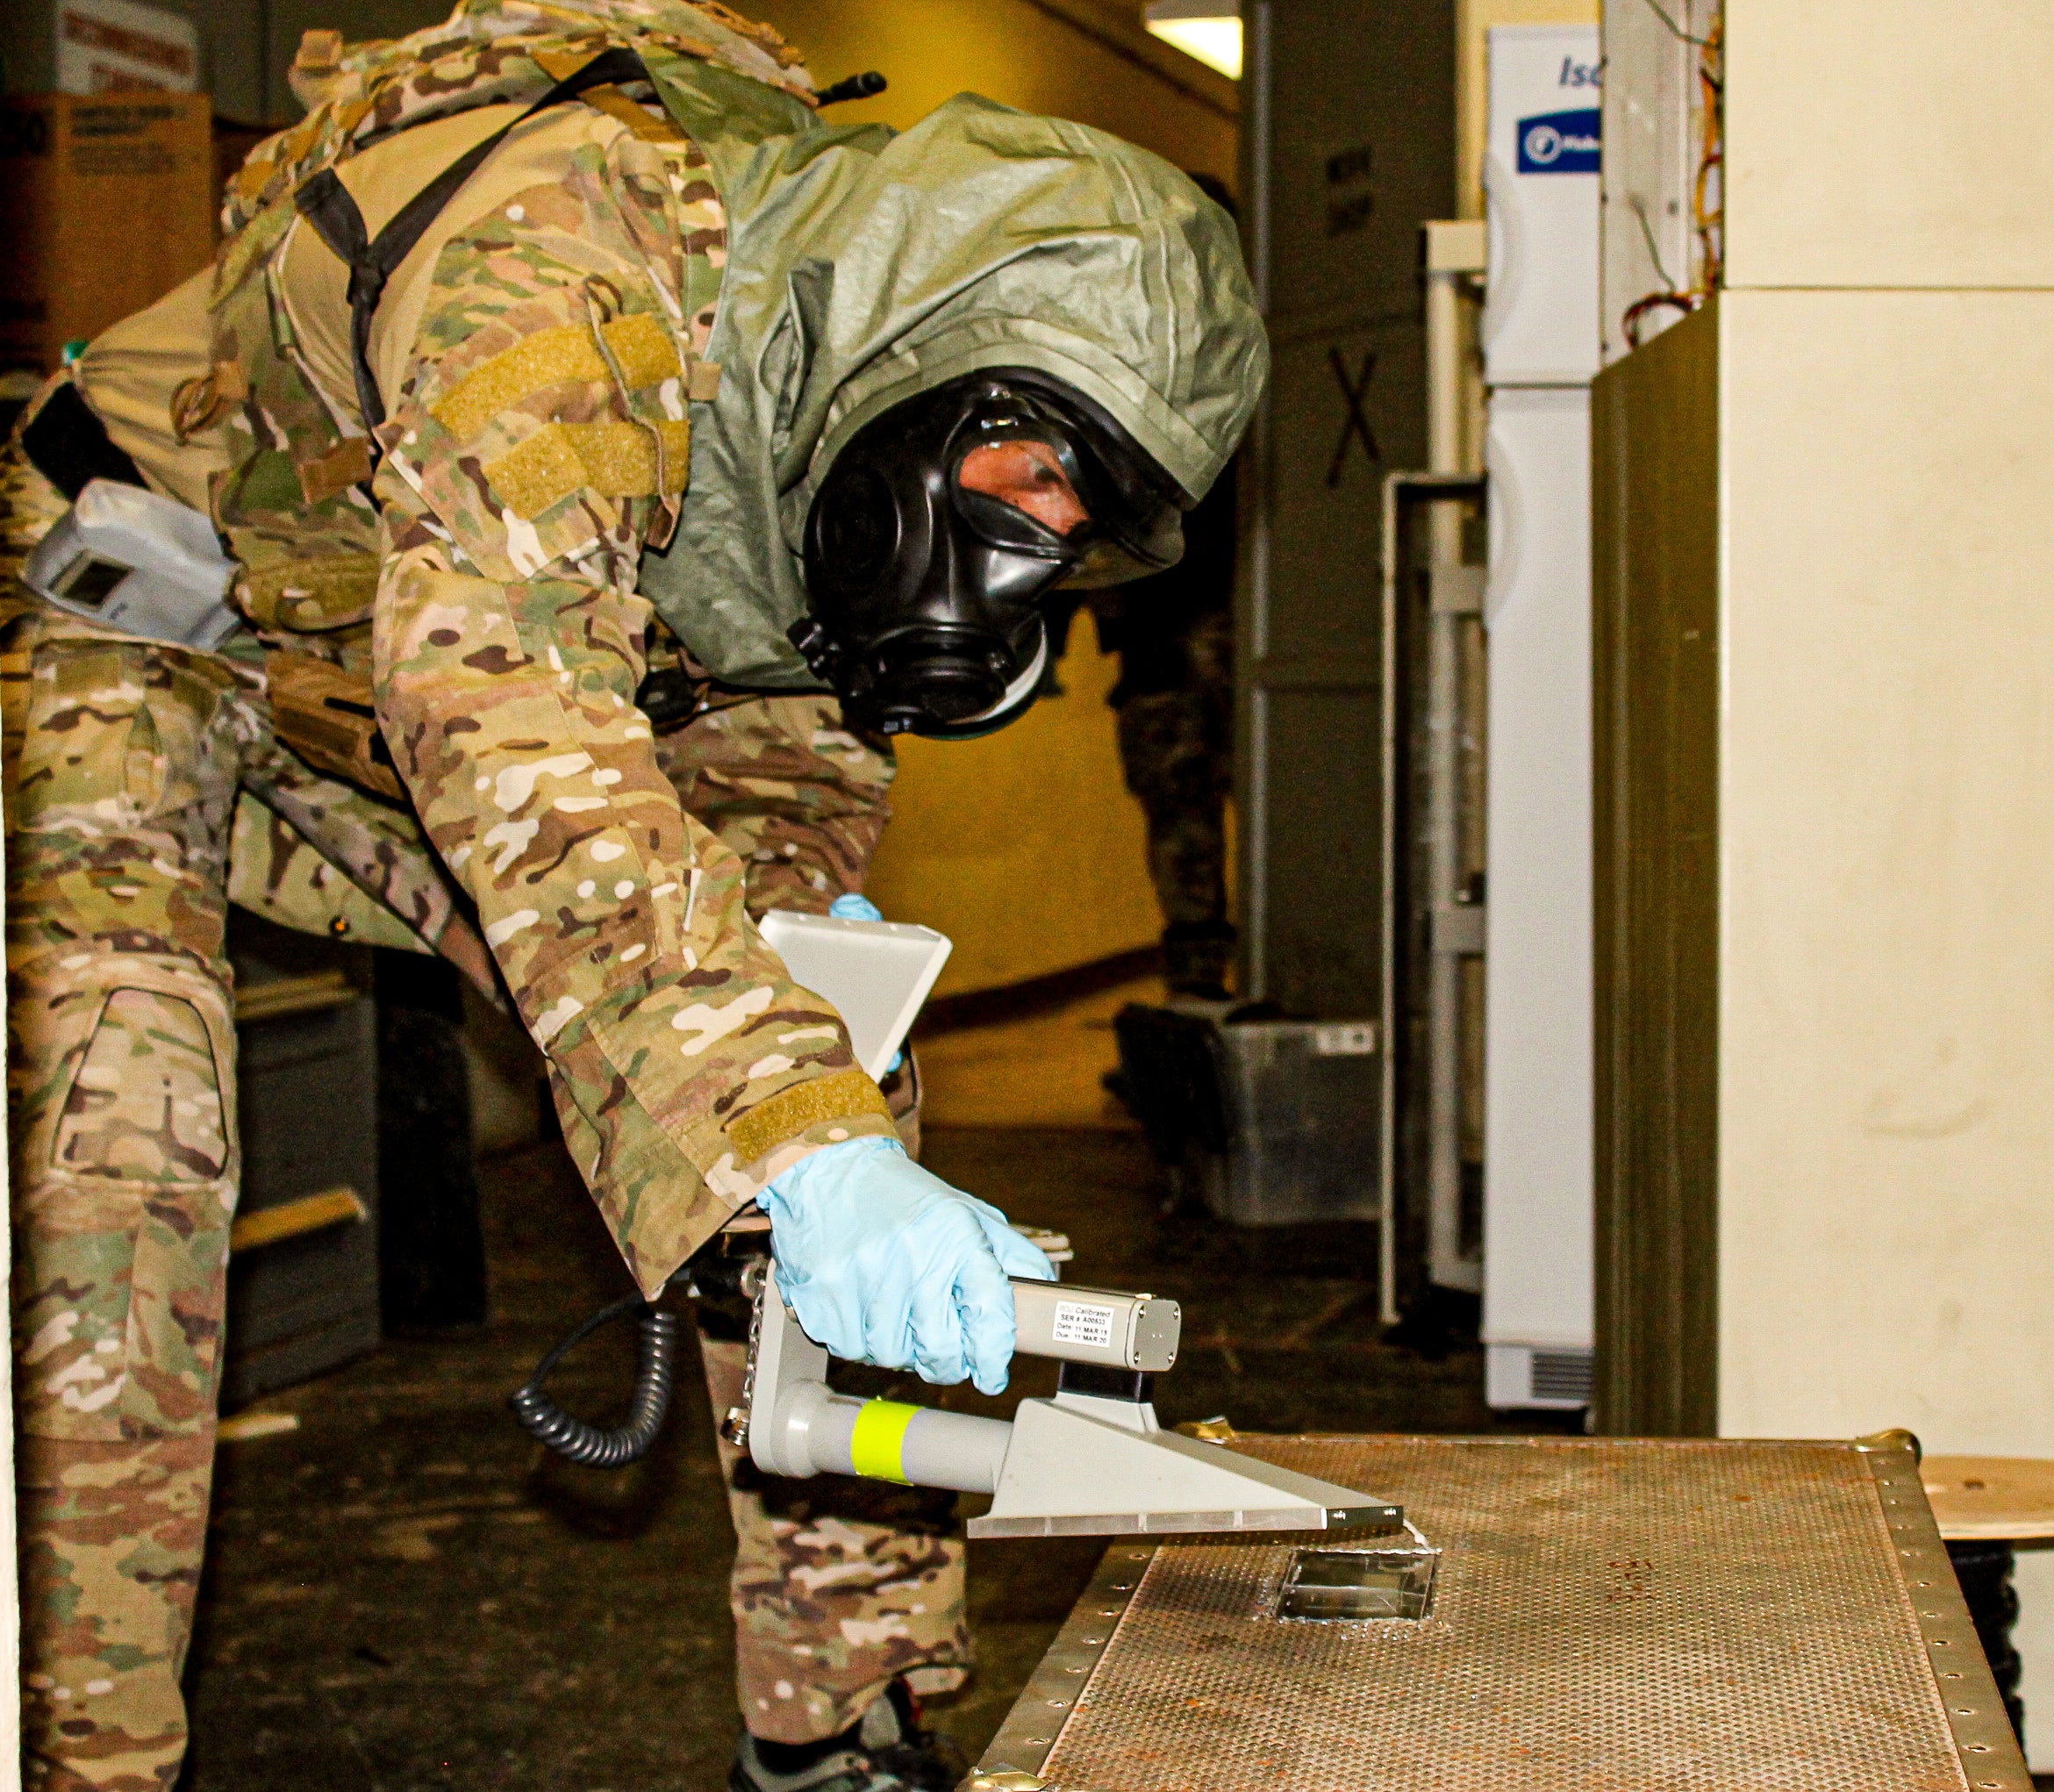 200604-N-UP025-001 San Diego, Calif. (June 4, 2020) An explosive ordnance disposal (EOD) technician assigned to EOD Mobile Unit Eleven conducts radiological search procedures at a training bunker onboard Naval Base Point Loma as part of training administered through EOD Training and Evaluation Unit One. Navy EOD technicians are uniquely qualified to detect, identify, exploit, and eliminate chemical, biological, radiological, nuclear and explosive weapons in support of conventional and special operations forces. (U.S. Navy photo by Lt. Kara Handley/released)